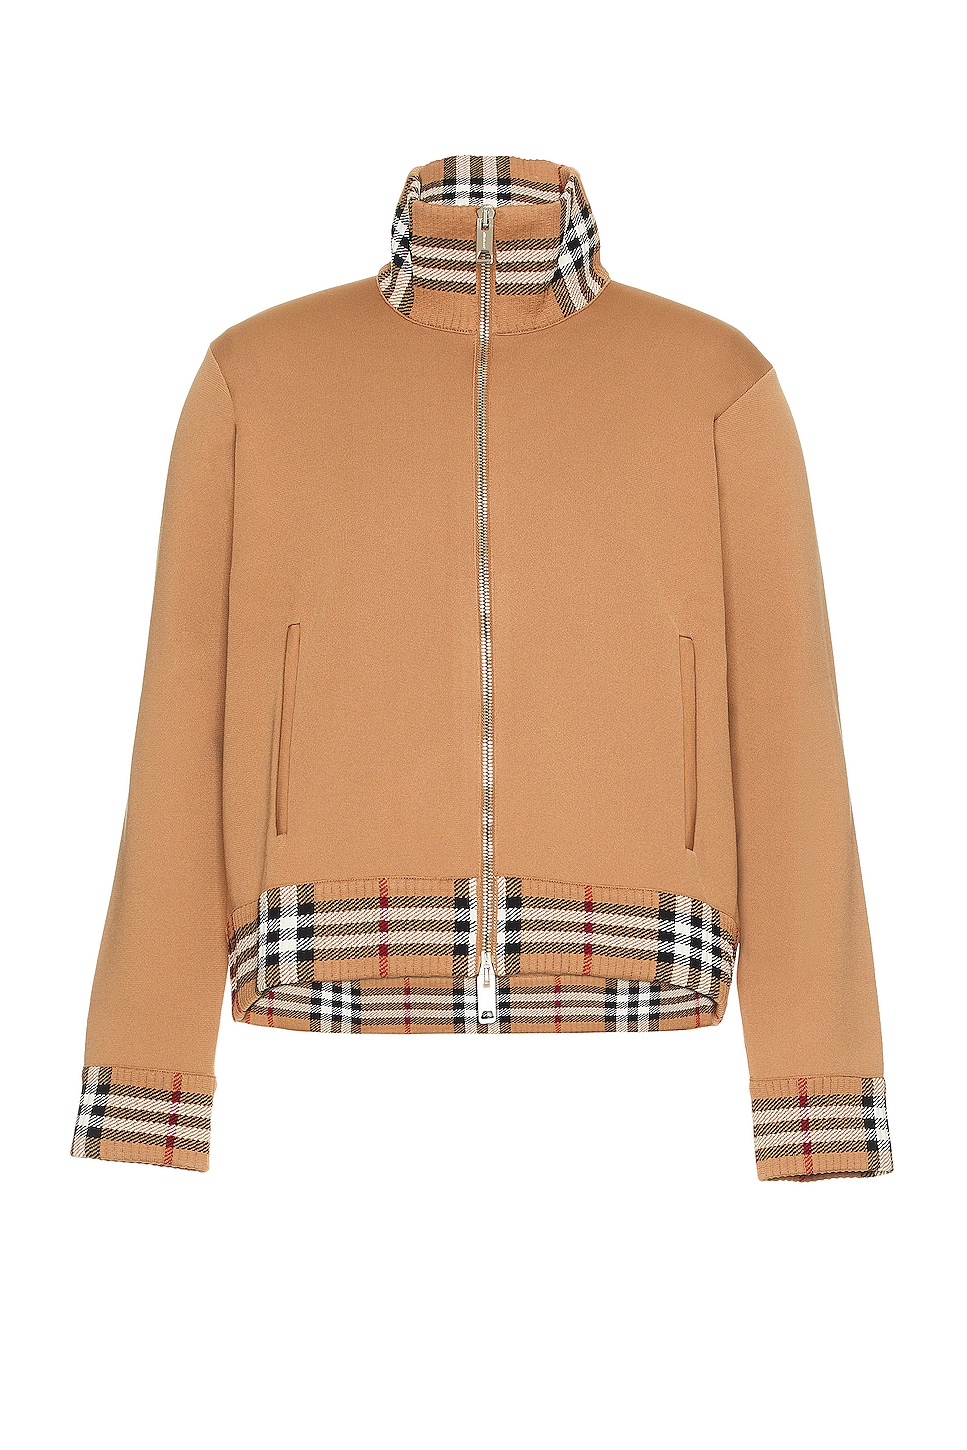 Image 1 of Burberry Dalesford Jacket in Camel